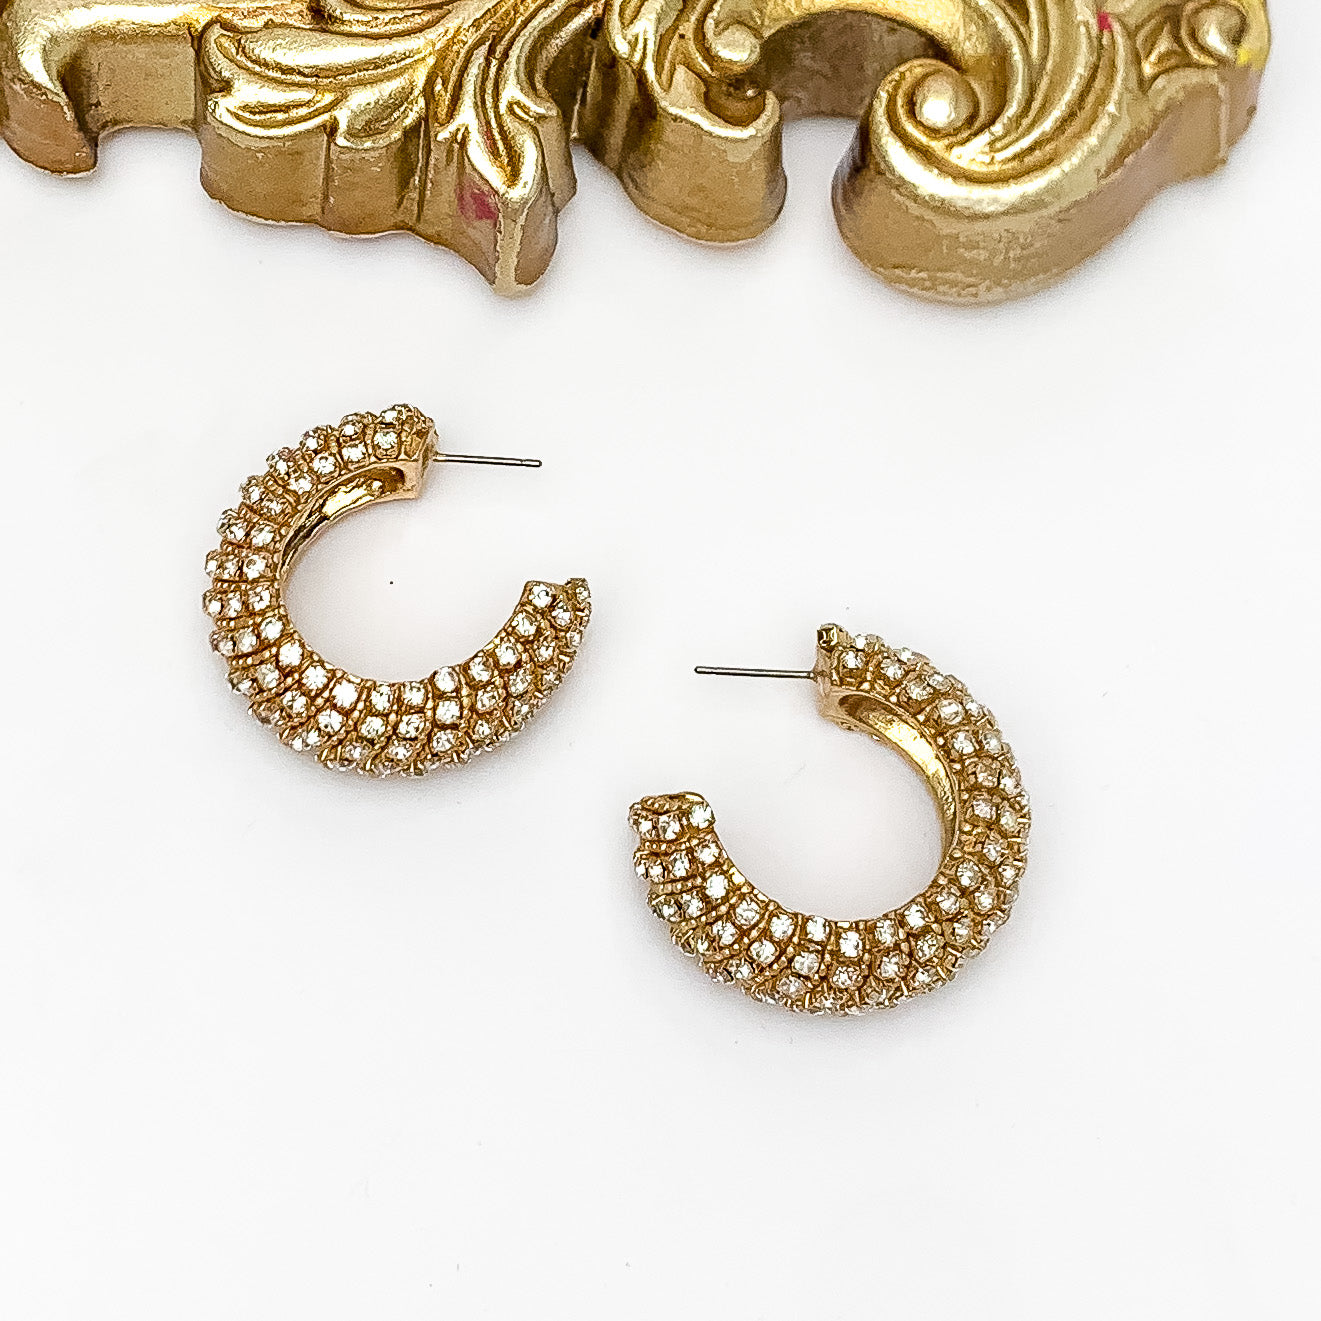 Gold Tone Bubble Hoop Earrings With Clear Crystals - Giddy Up Glamour Boutique